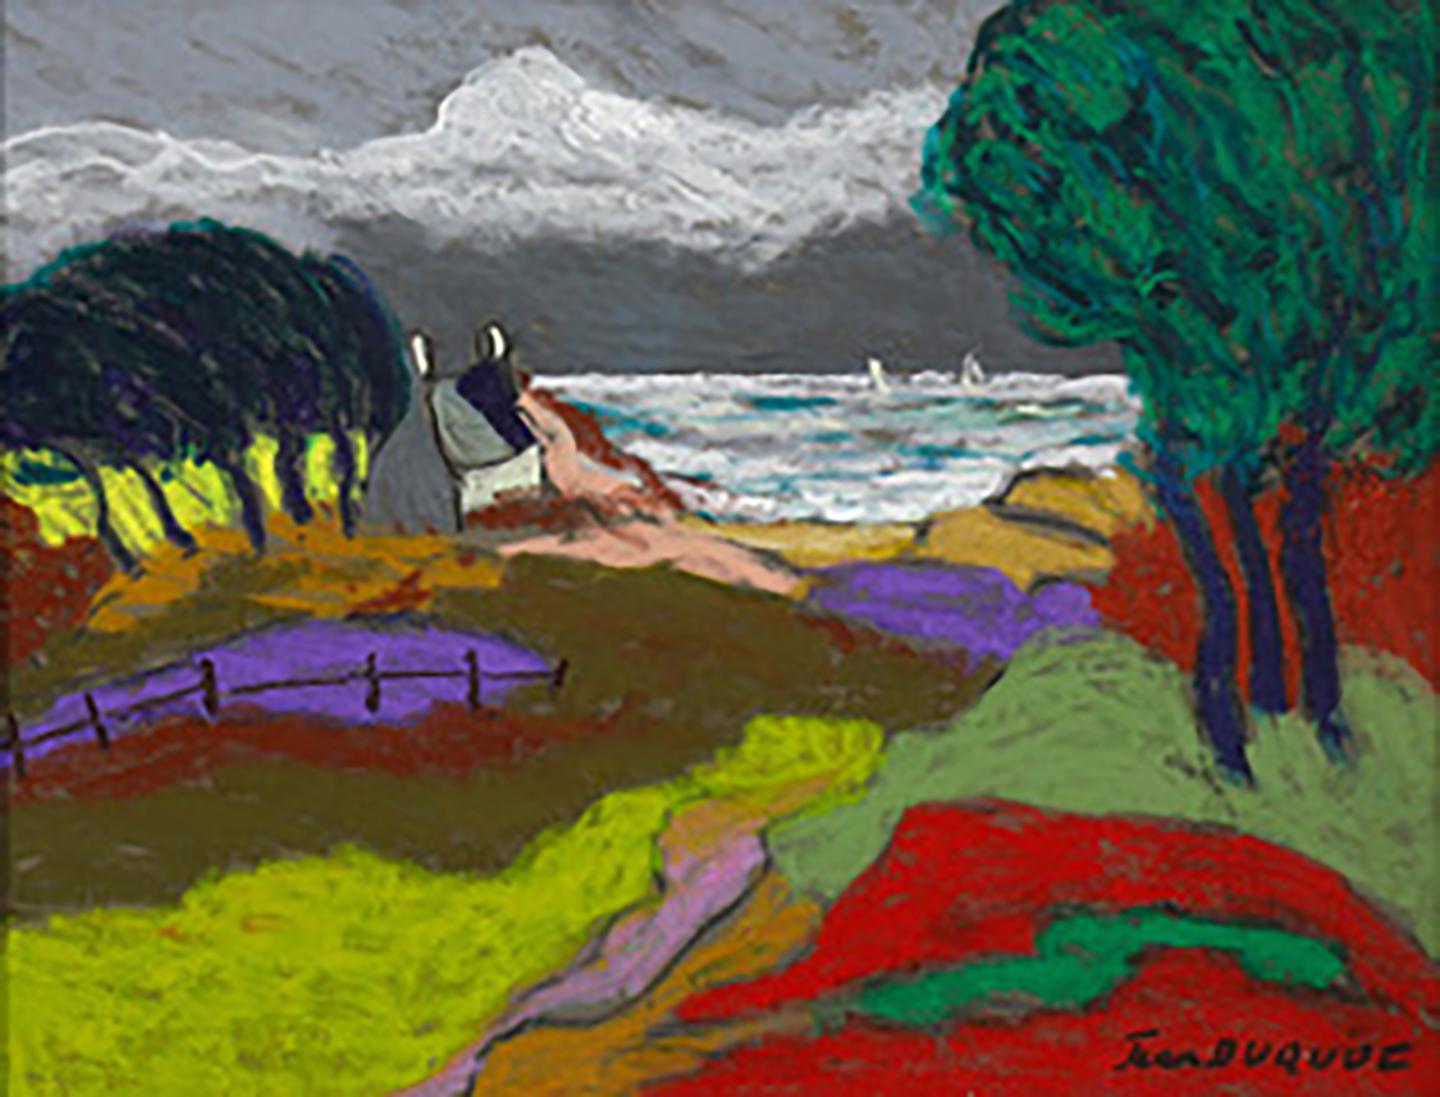 "Printemps tumultueux" - - France, Brittany, Expressionist, sea, pastel, spring